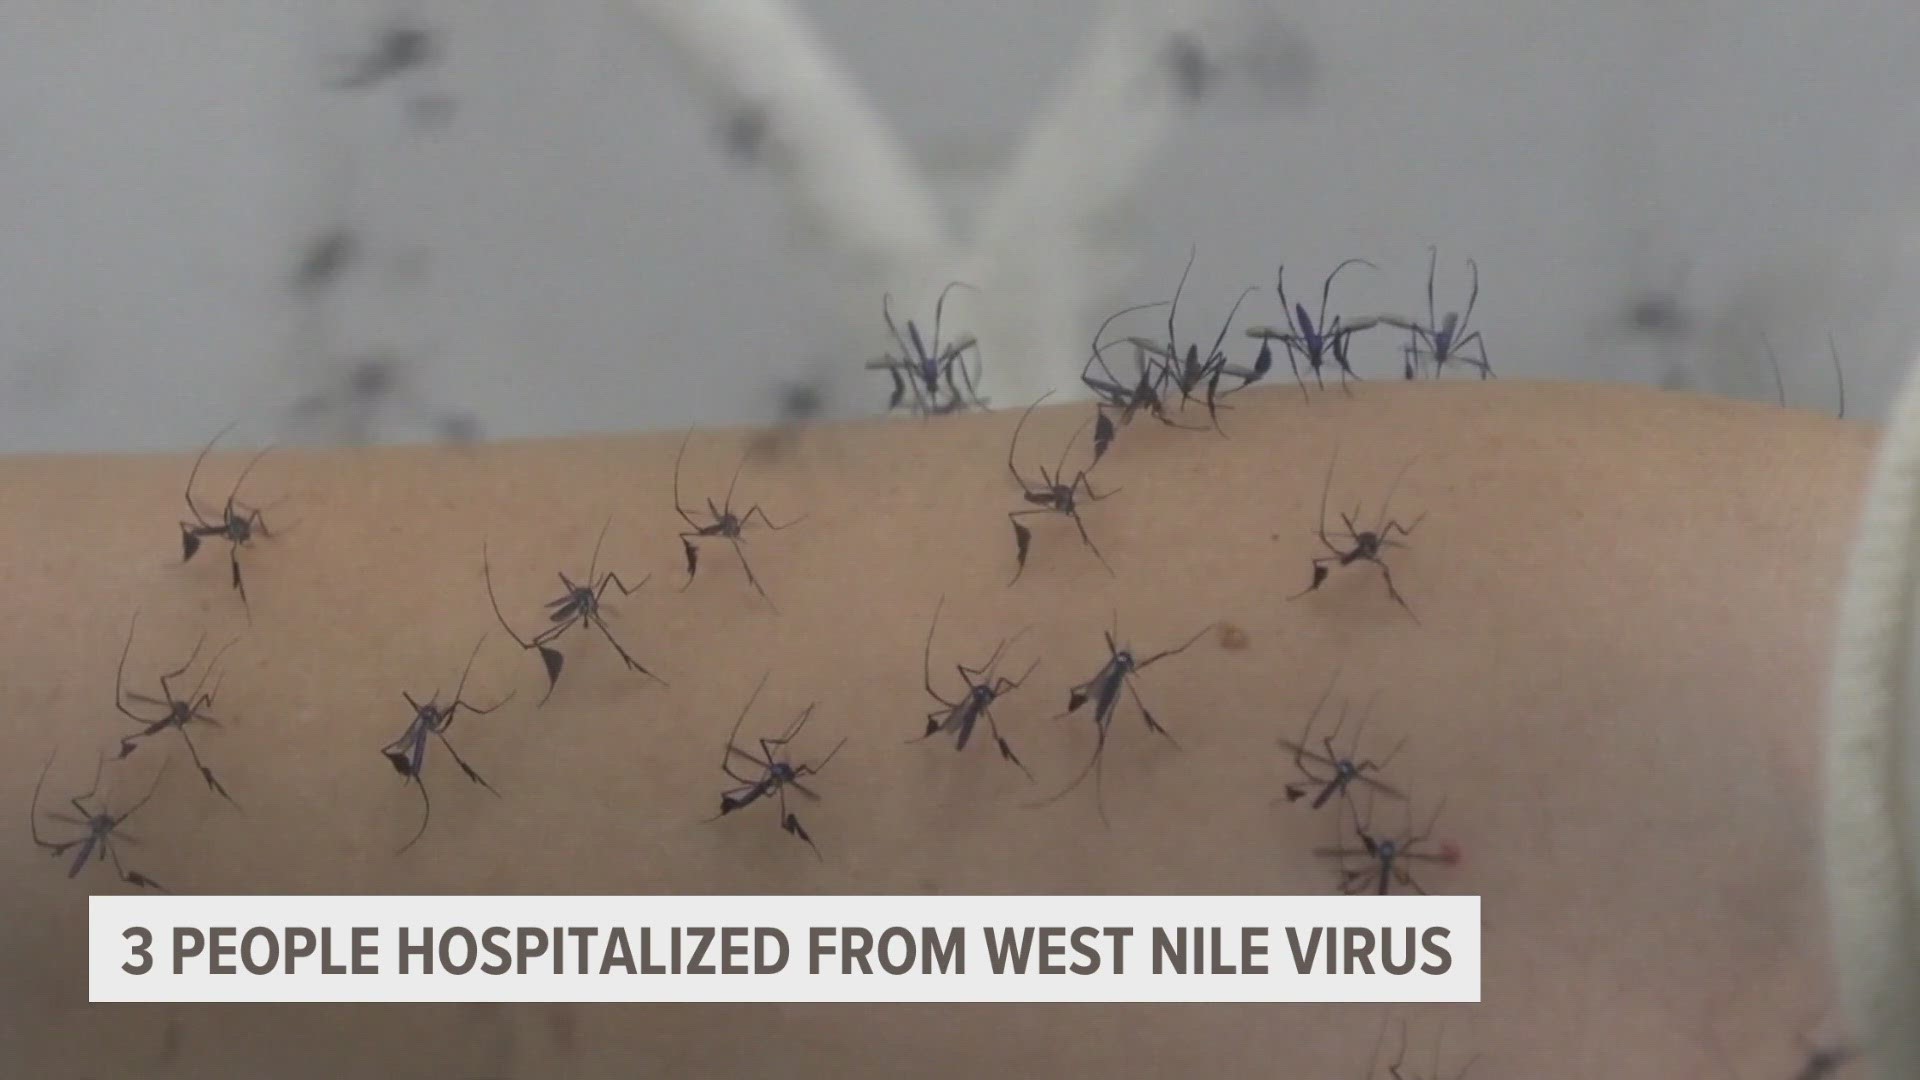 There are now two confirmed cases of West Nile Virus in Ottawa County and one in Kent County. All three patients have been hospitalized.